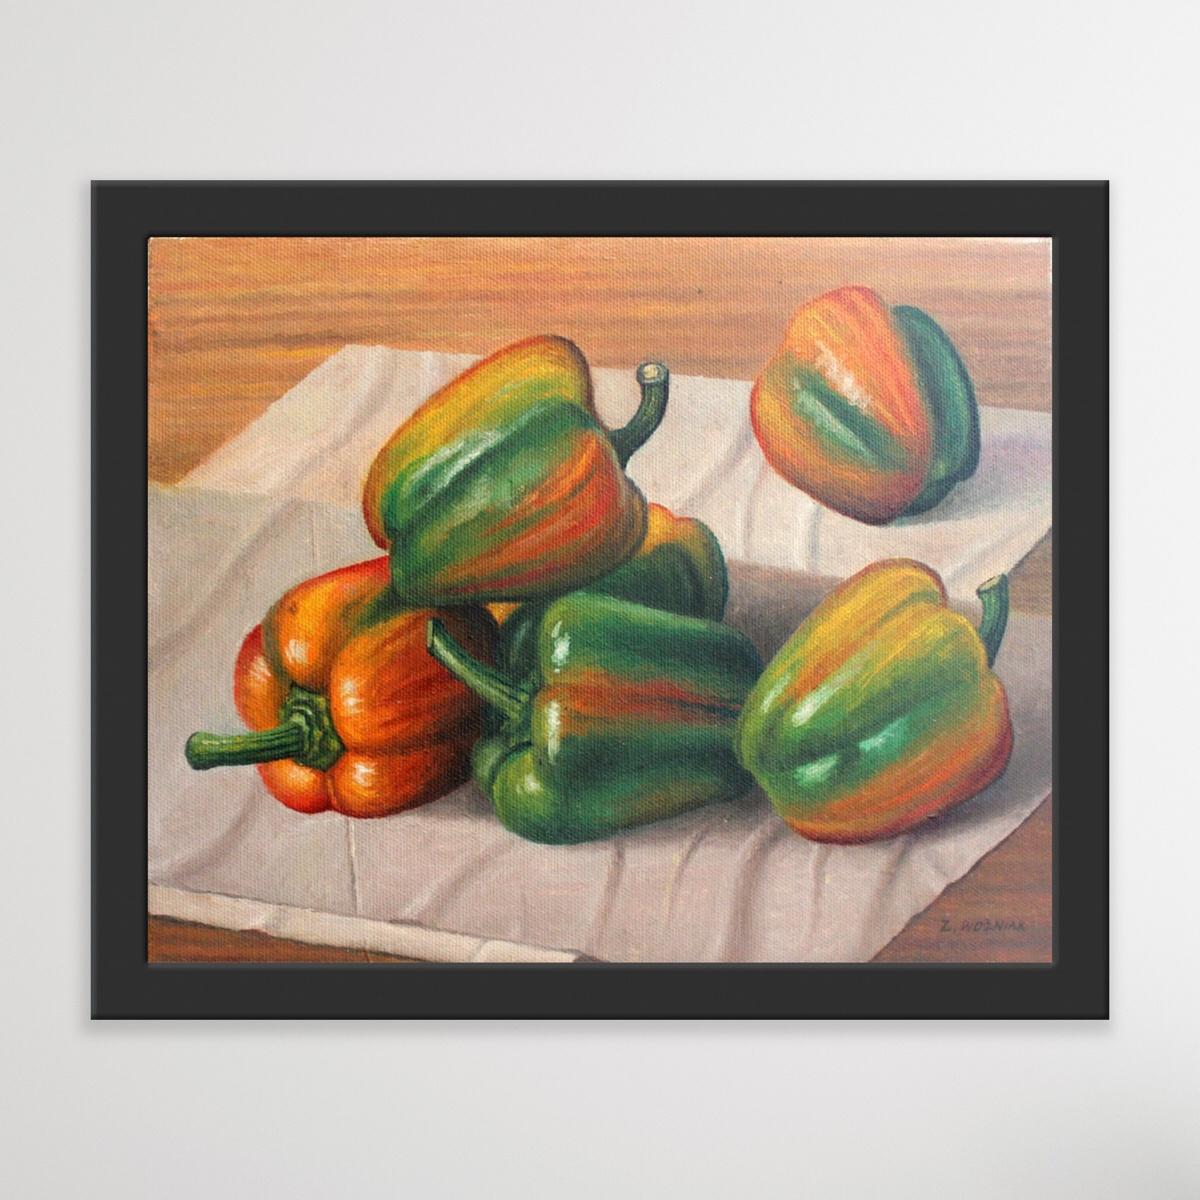 Still life with peppers - Figurative Oil Painting, Realism, Polish art - Brown Still-Life Painting by Zbigniew Wozniak